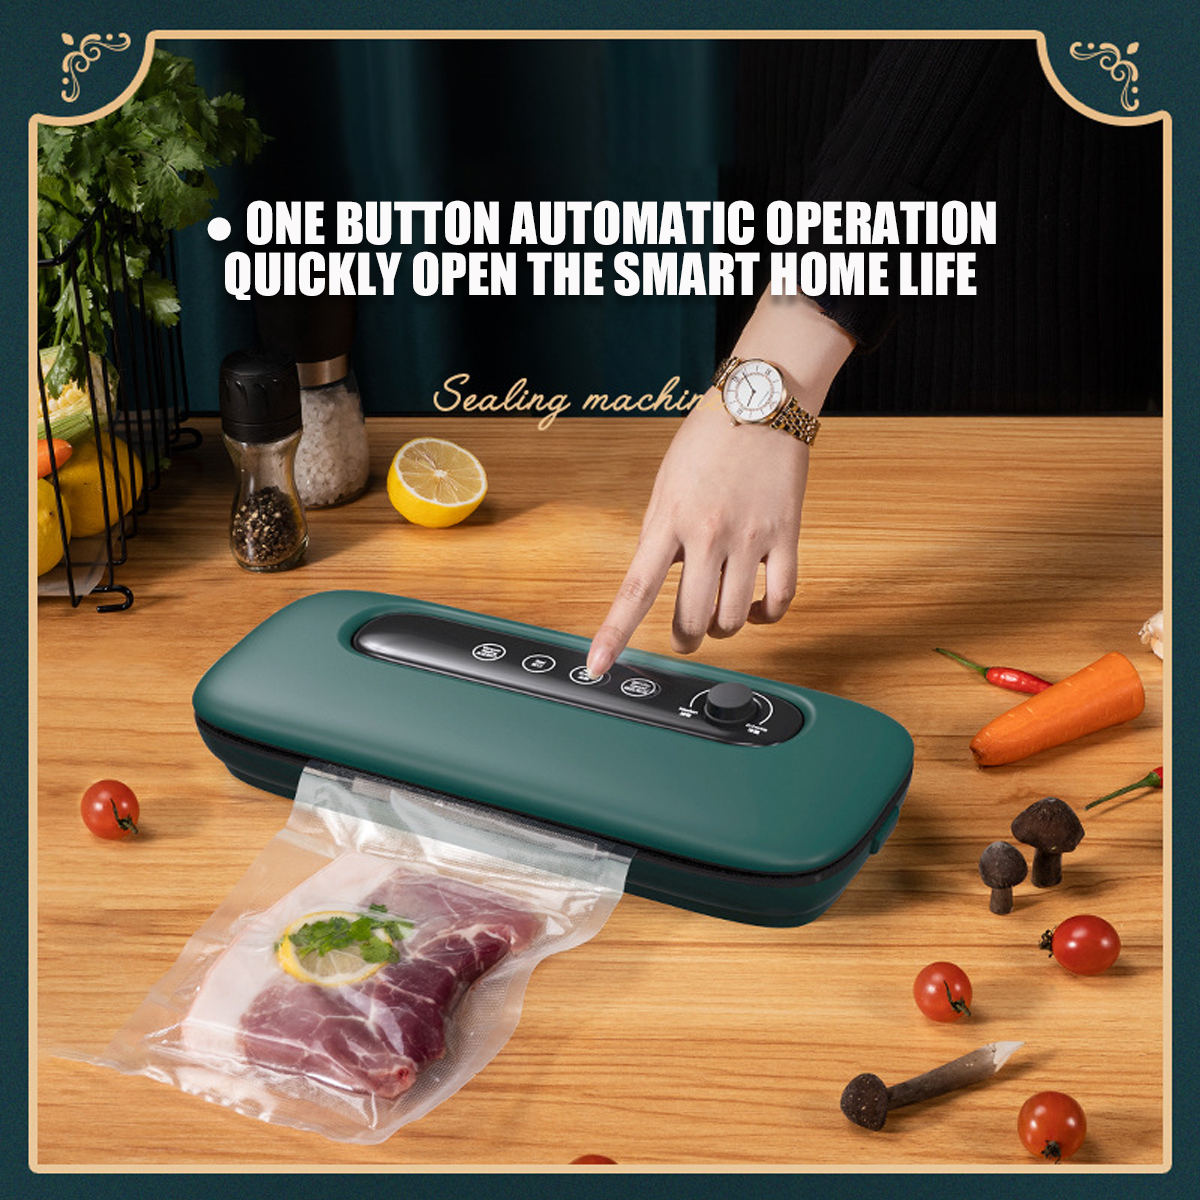 Vacuum-Sealer-Machine-Full-Automatic-Food-Sealer-Air-Sealing-System-for-Food-Storage-3-Functions-Ove-1928369-5